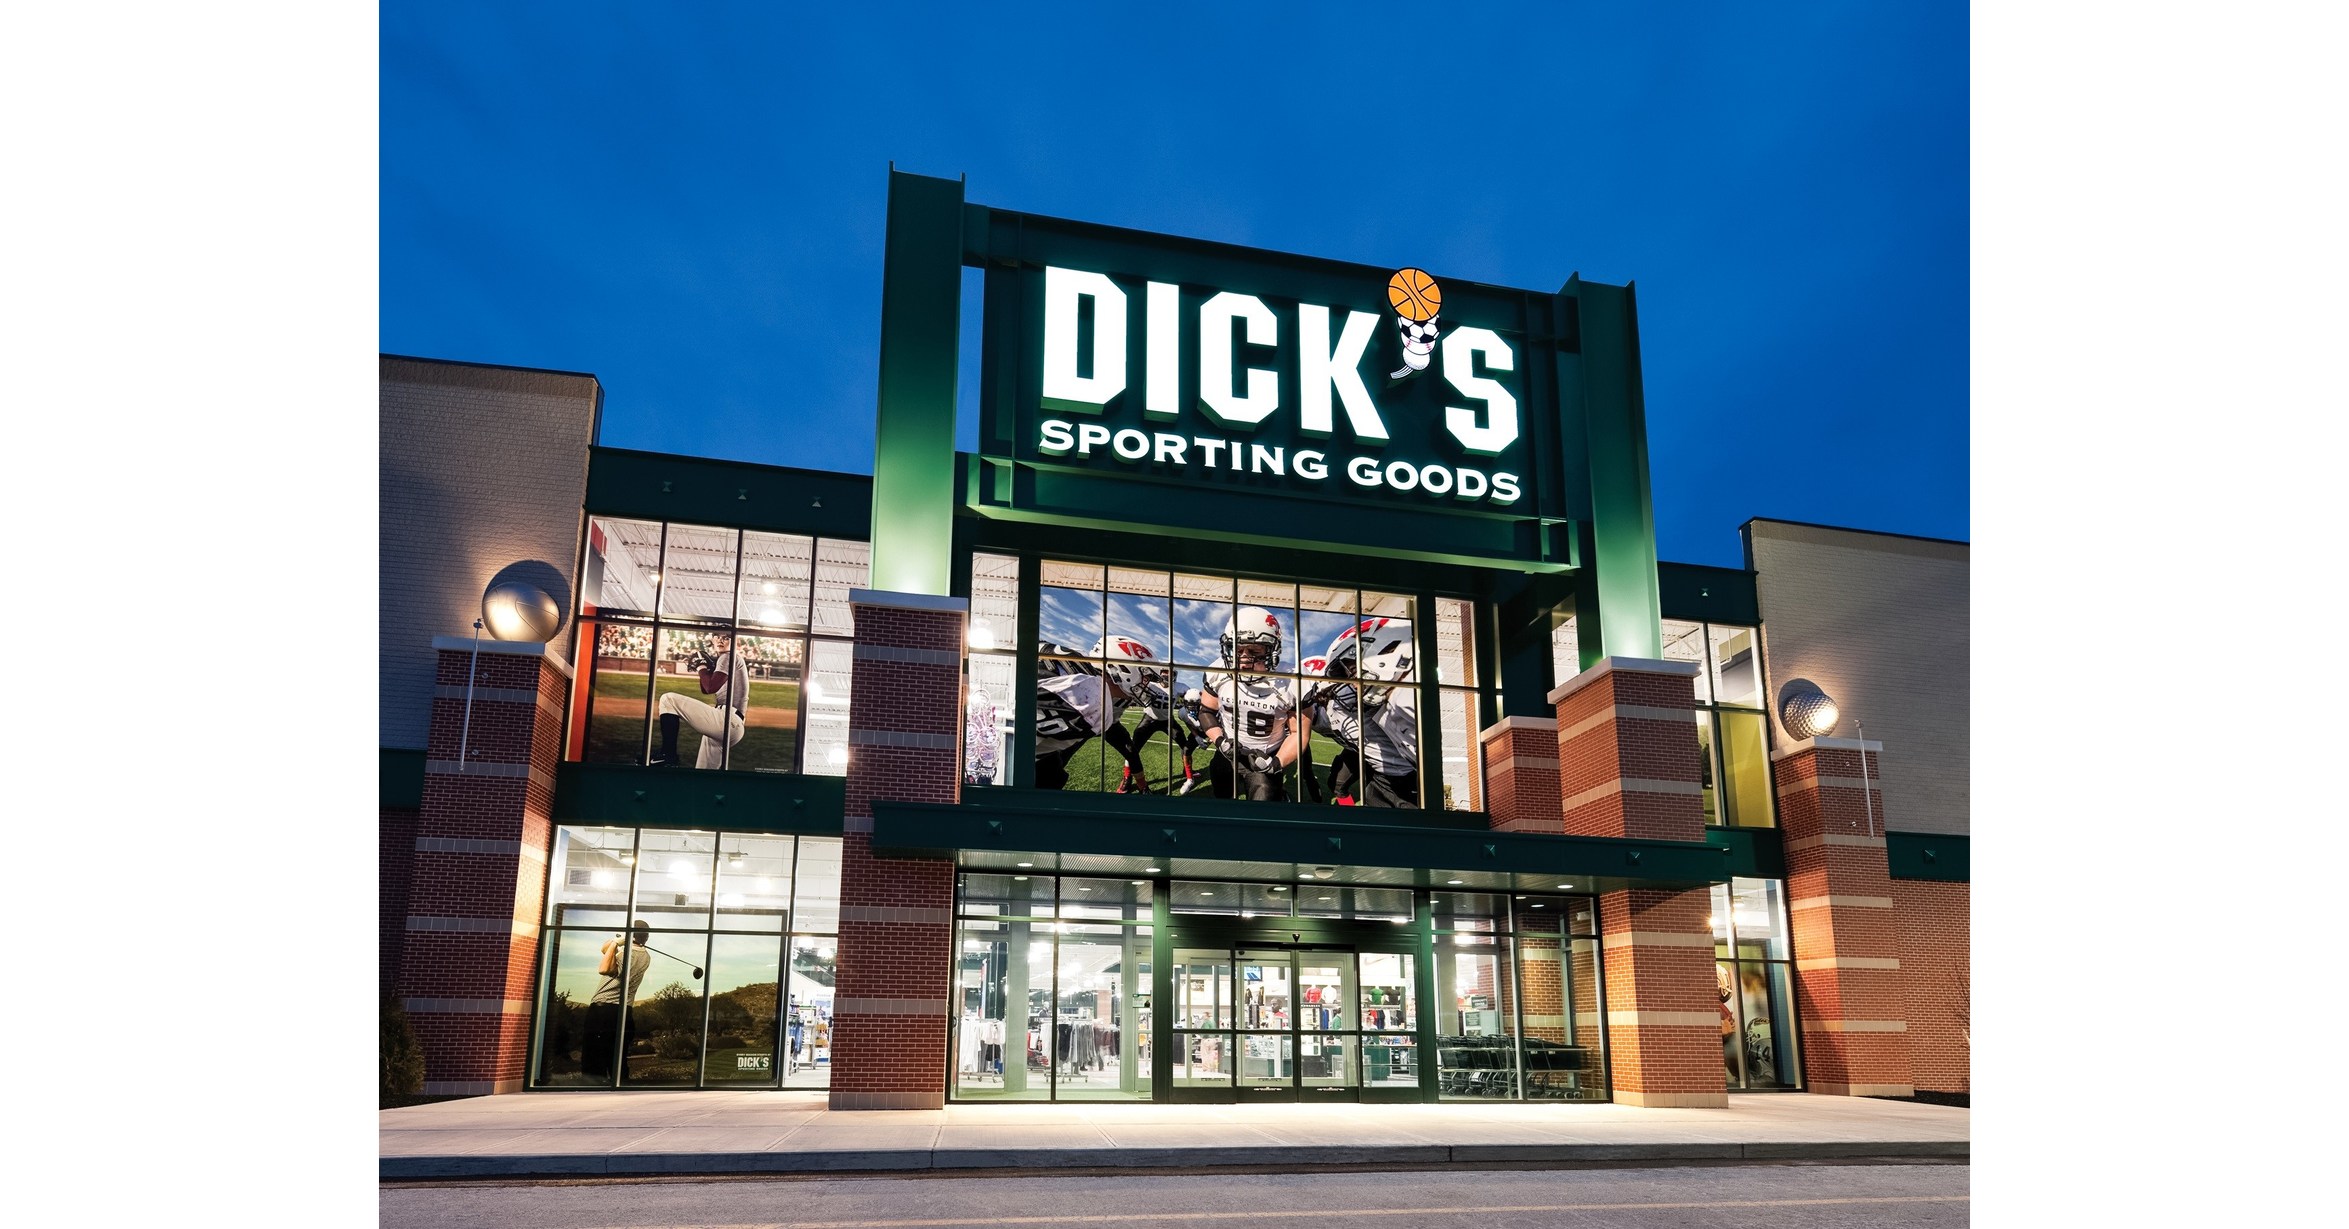 Hockey Equipment & Gear  Curbside Pickup Available at DICK'S